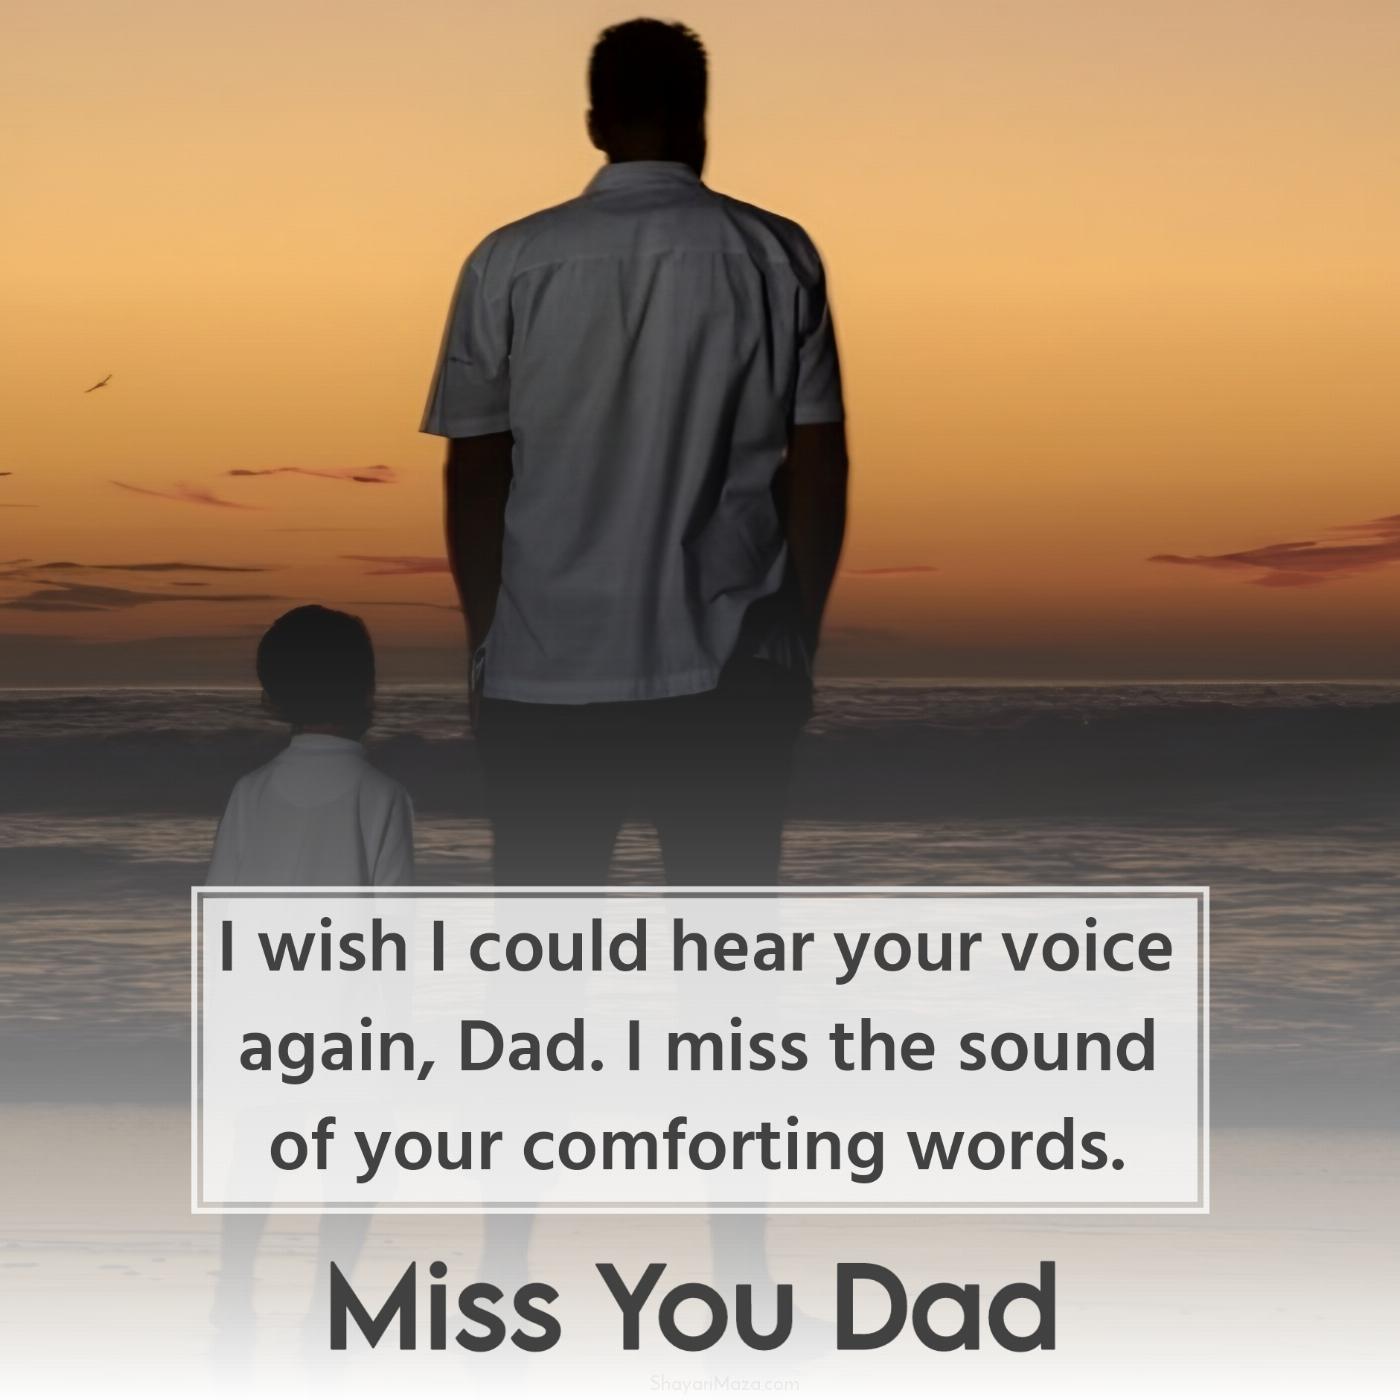 I wish I could hear your voice again Dad